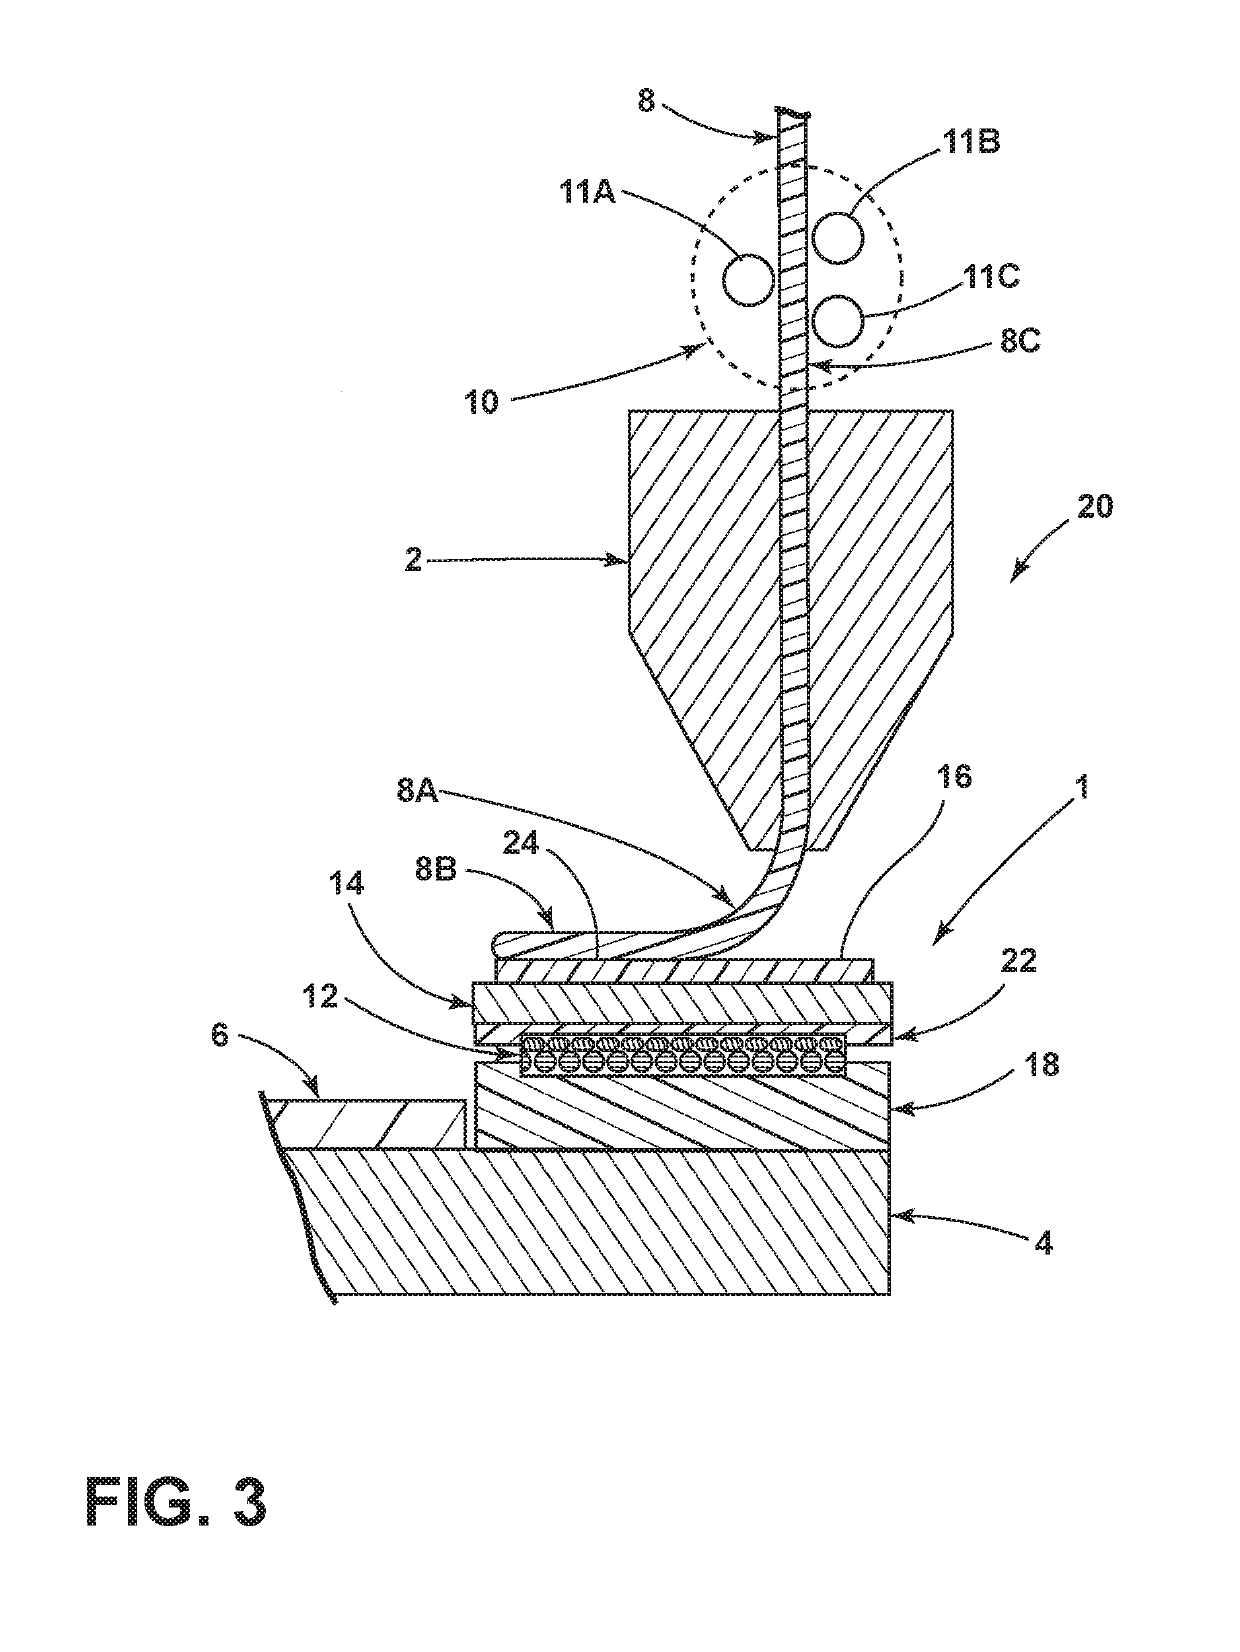 Adhesion test station in an extrusion apparatus and methods for using the same